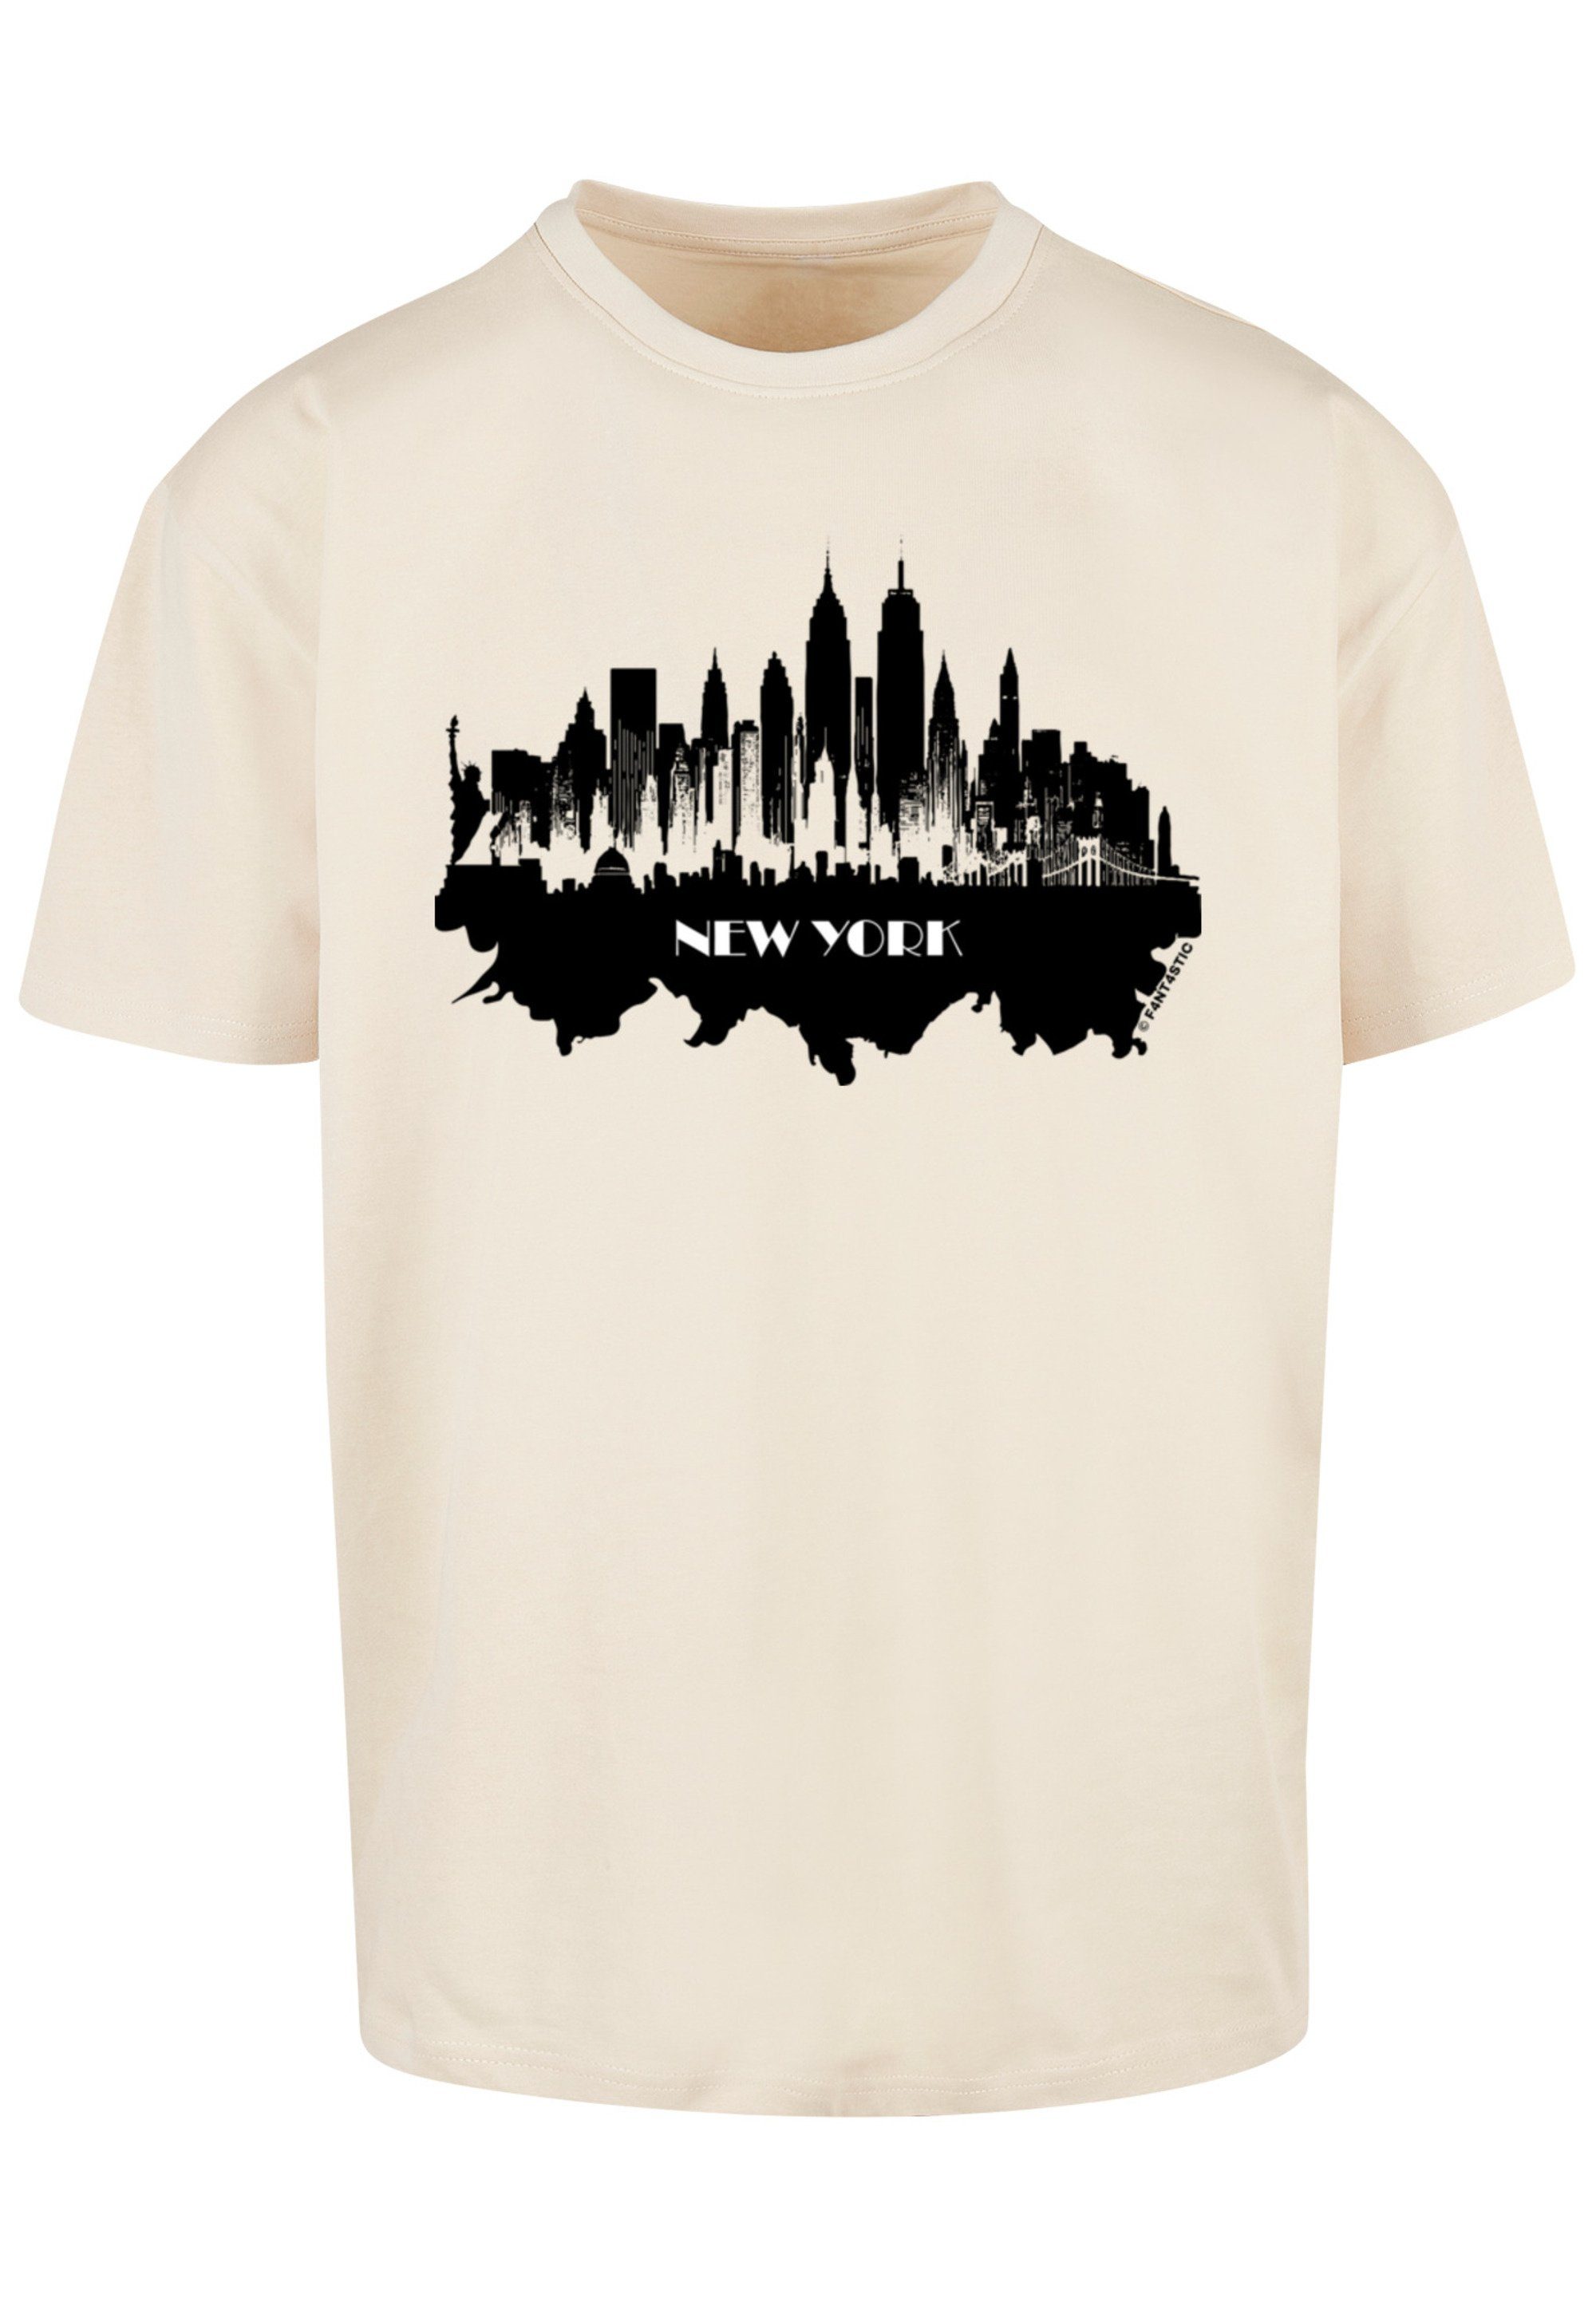 F4NT4STIC T-Shirt Cities sand Print New York - Collection skyline